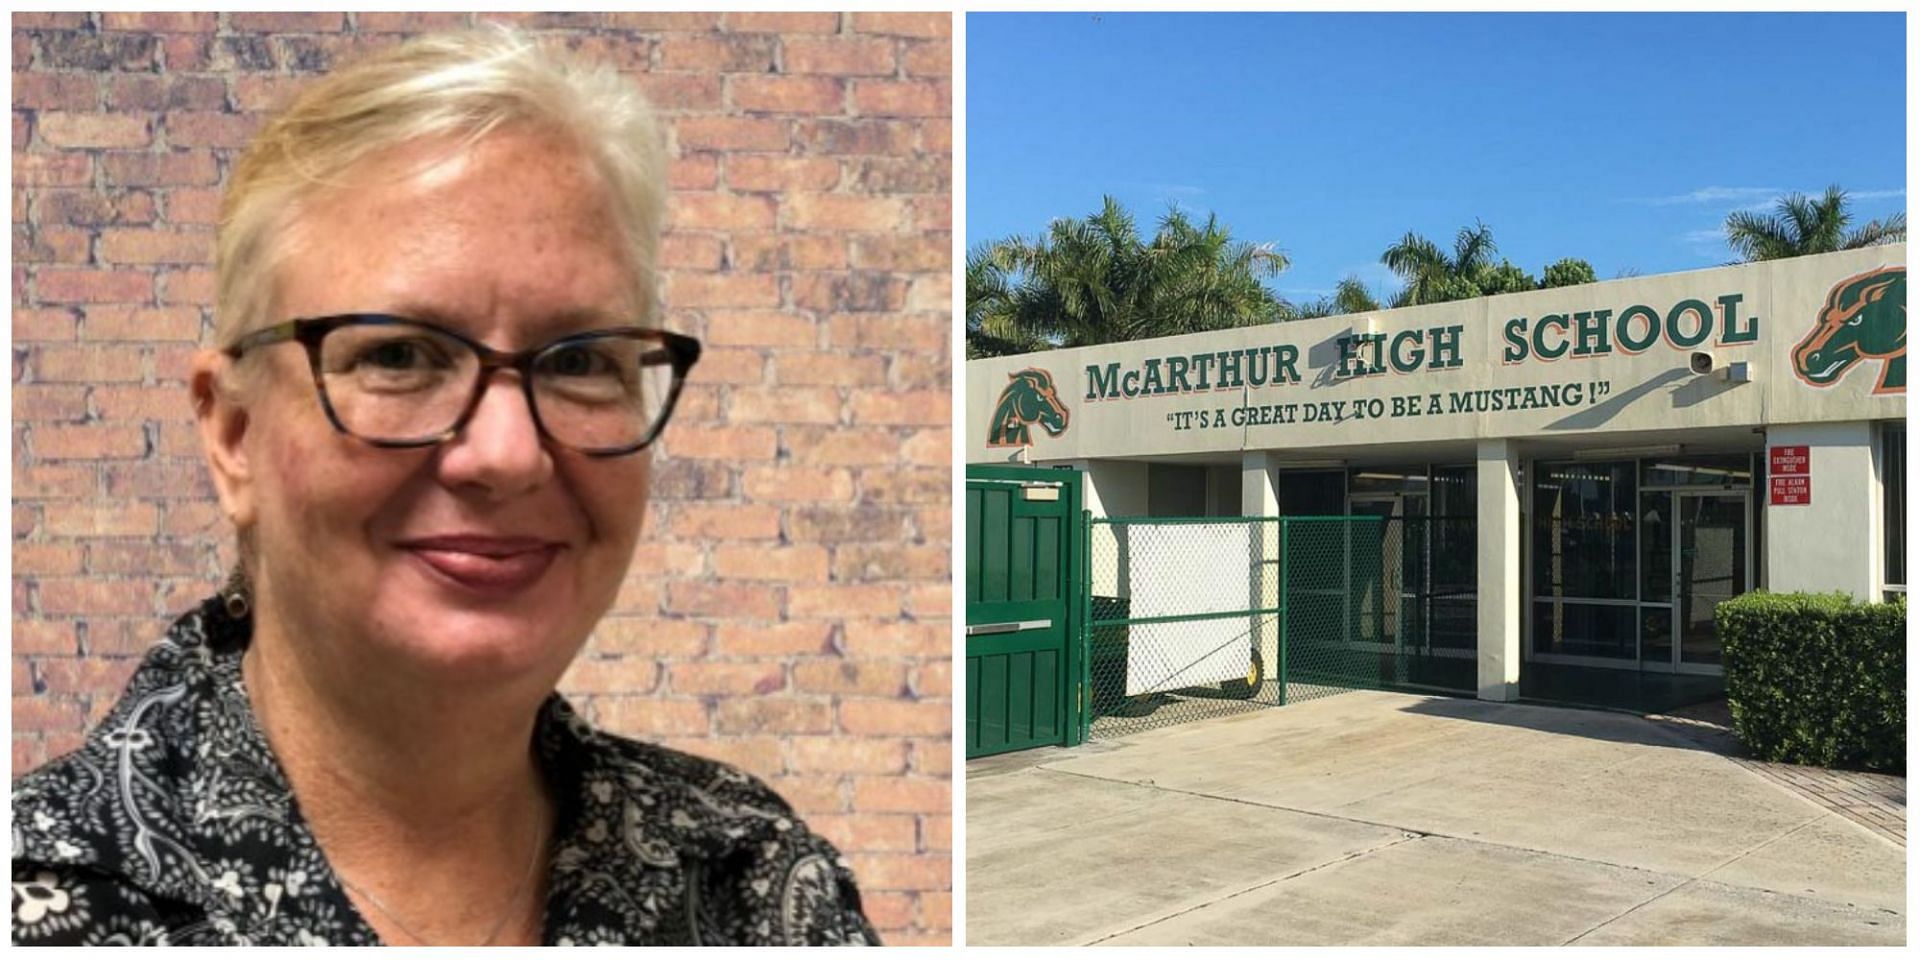 Joanna Herring, a language arts teacher at the McArthur High in Florida has been terminated from her role after receiving a number of complaints from parents and fellow teachers. (Image via Facebook)